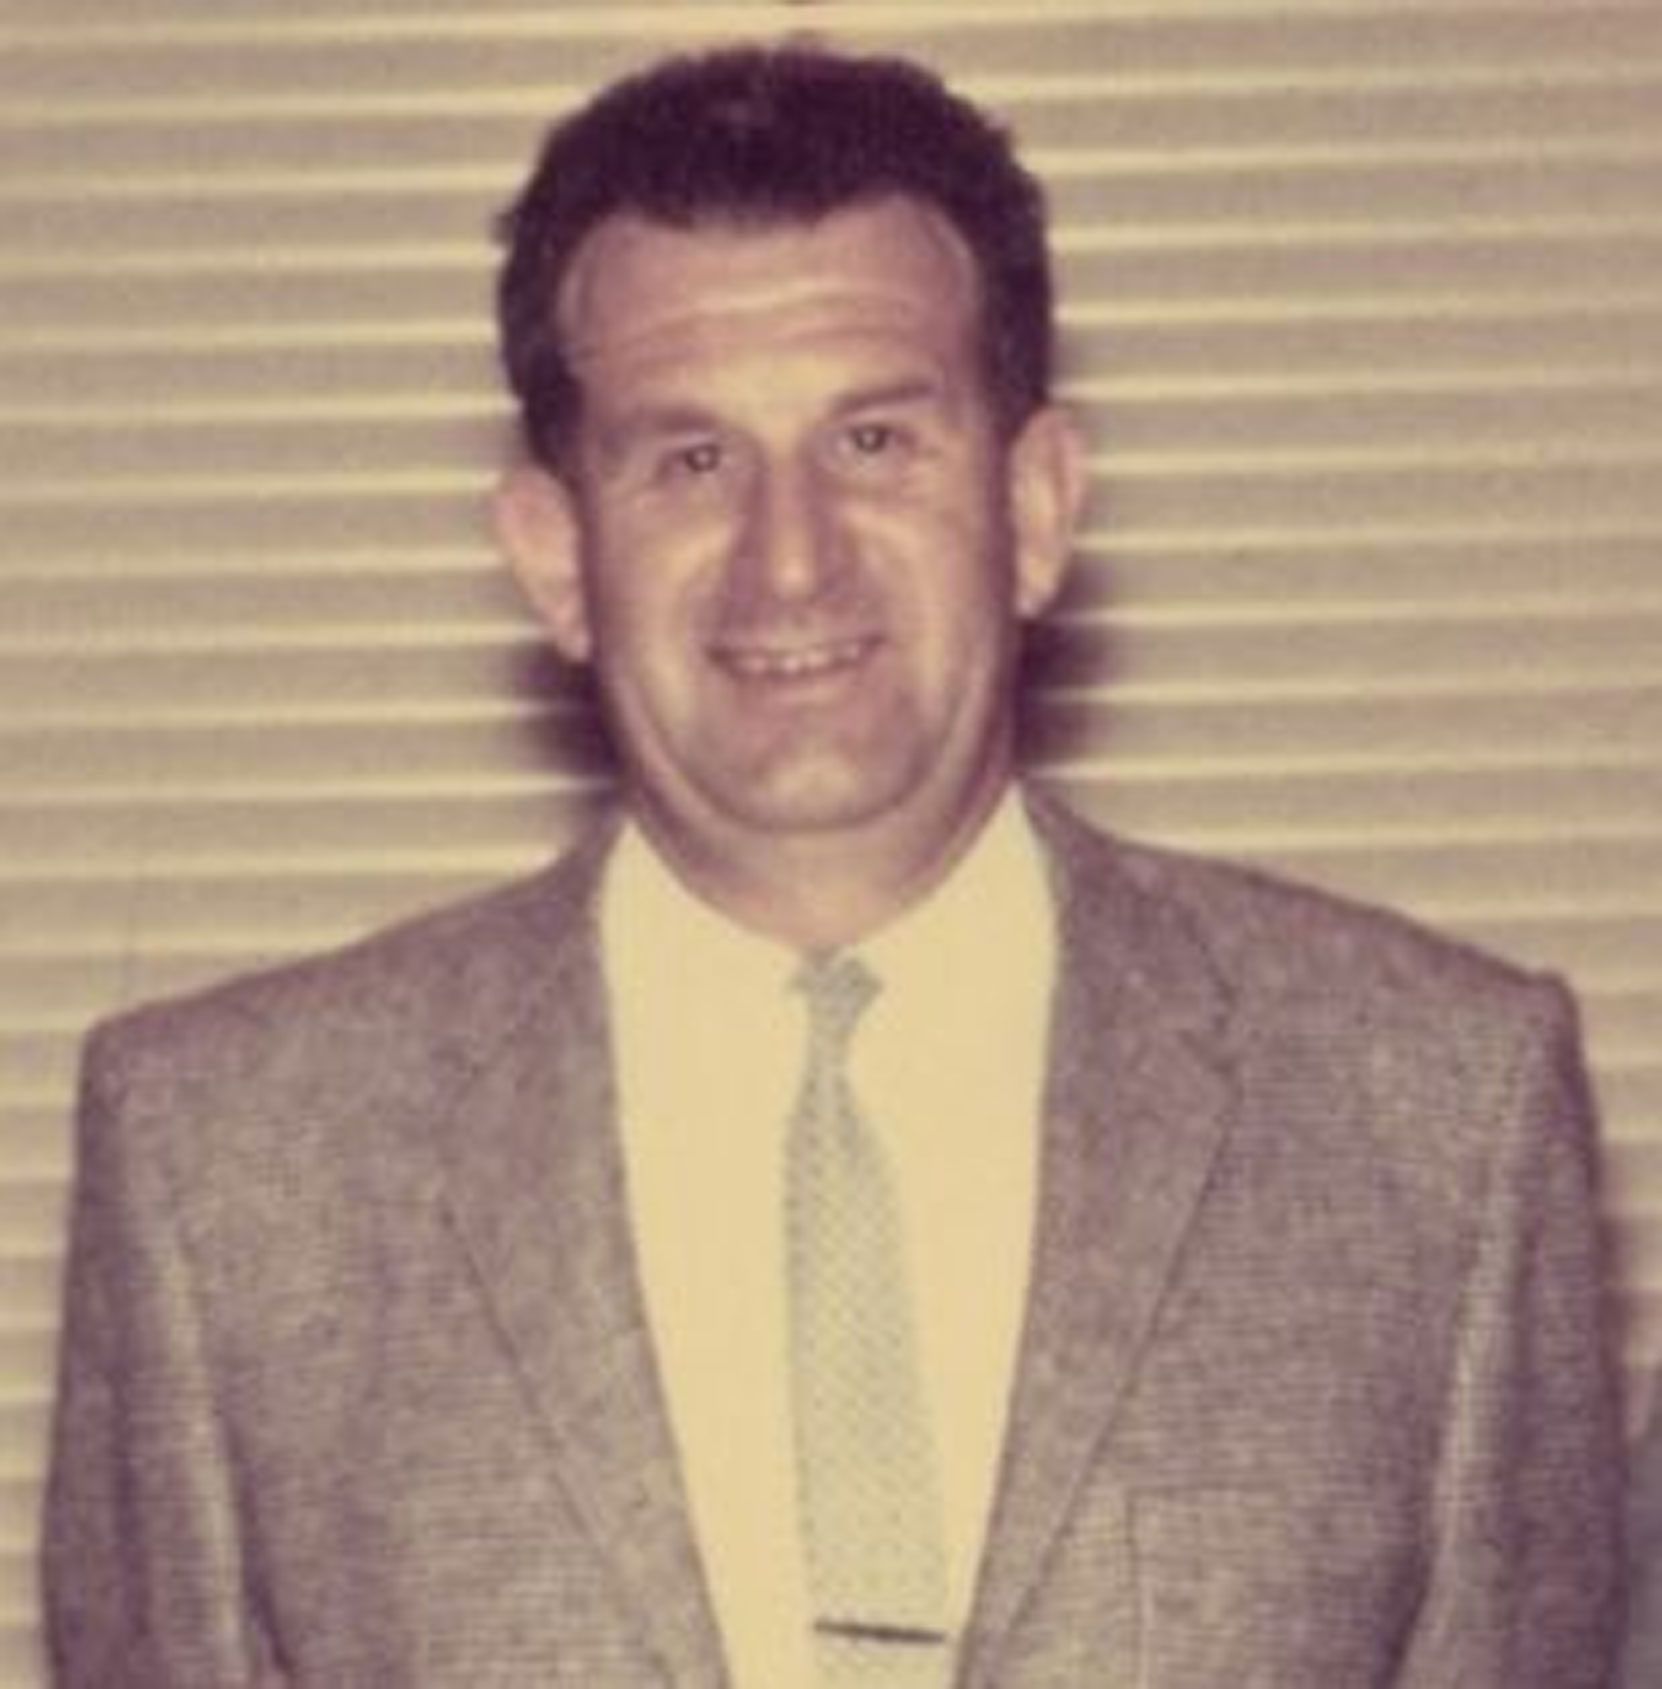 Norman Parfitt (1917-1990) was a Past Master of Mt. Newton Lodge in Saanichton. He was one of the partners in the Parfitt Brothers construction firm (photo courtesy of Glenn Parfitt - family photo, used with permission)